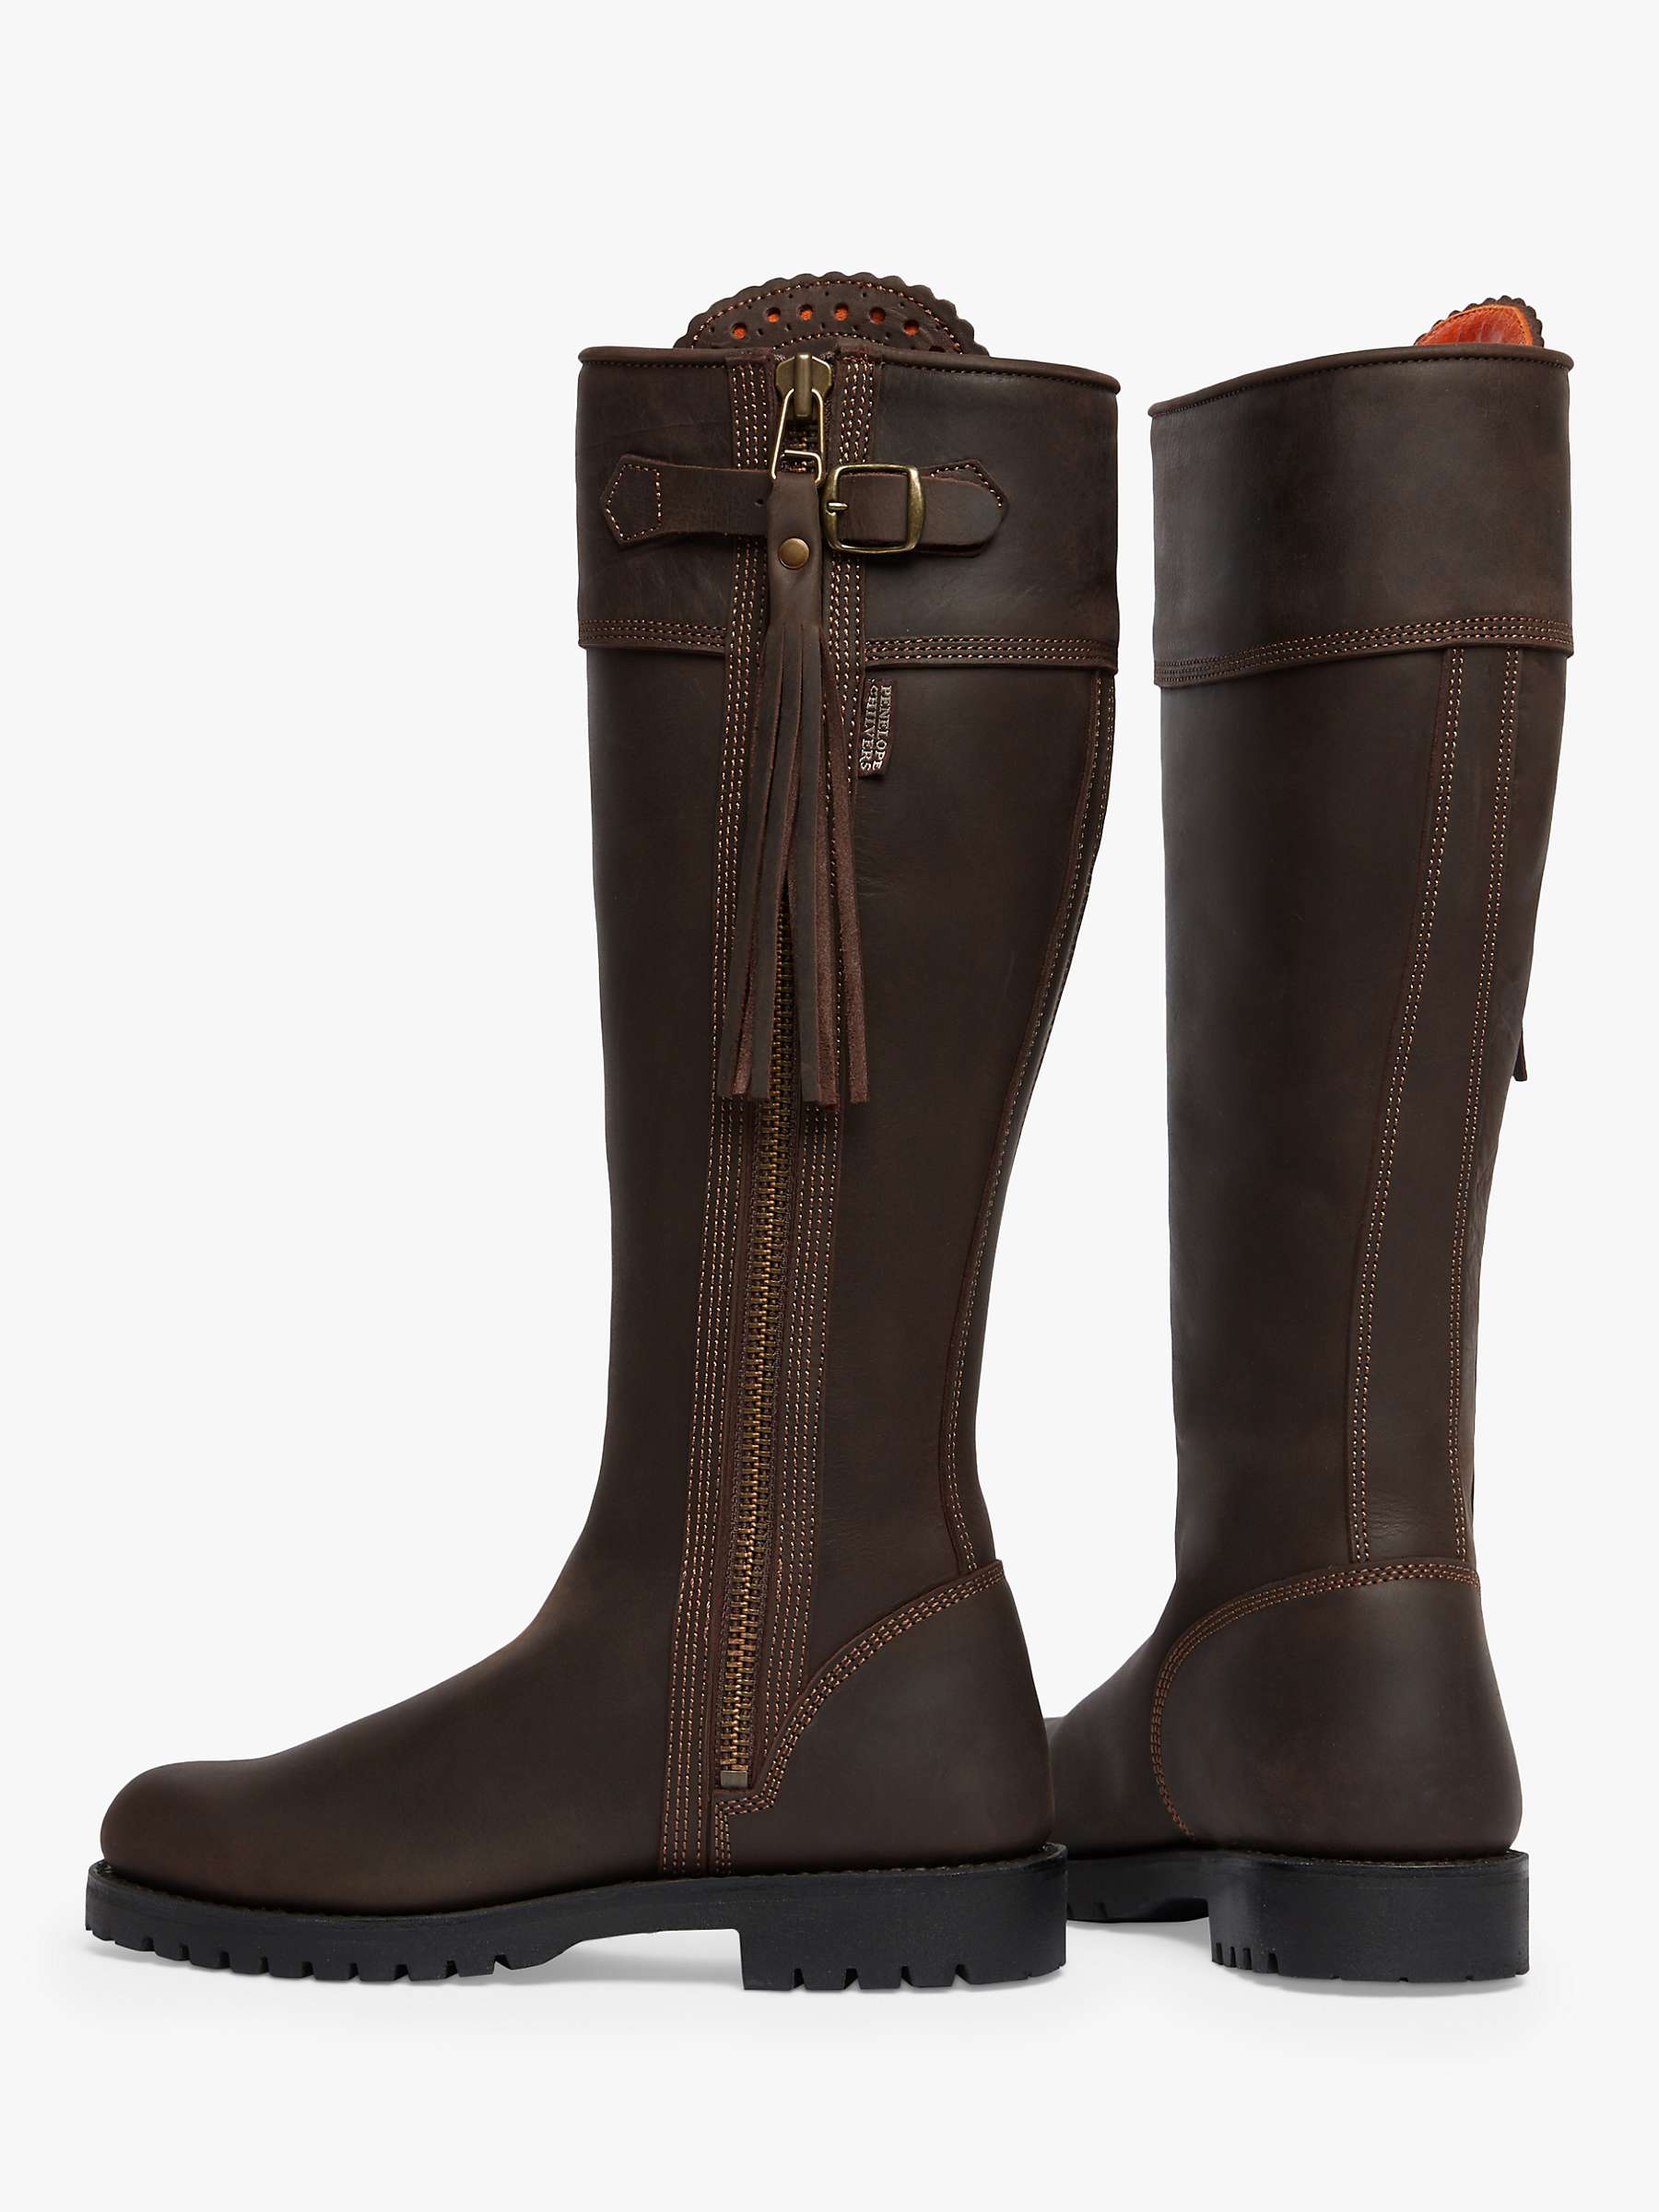 Buy Penelope Chilvers Stand Wide Calf Fit Tassel Knee Boots, Conker Online at johnlewis.com